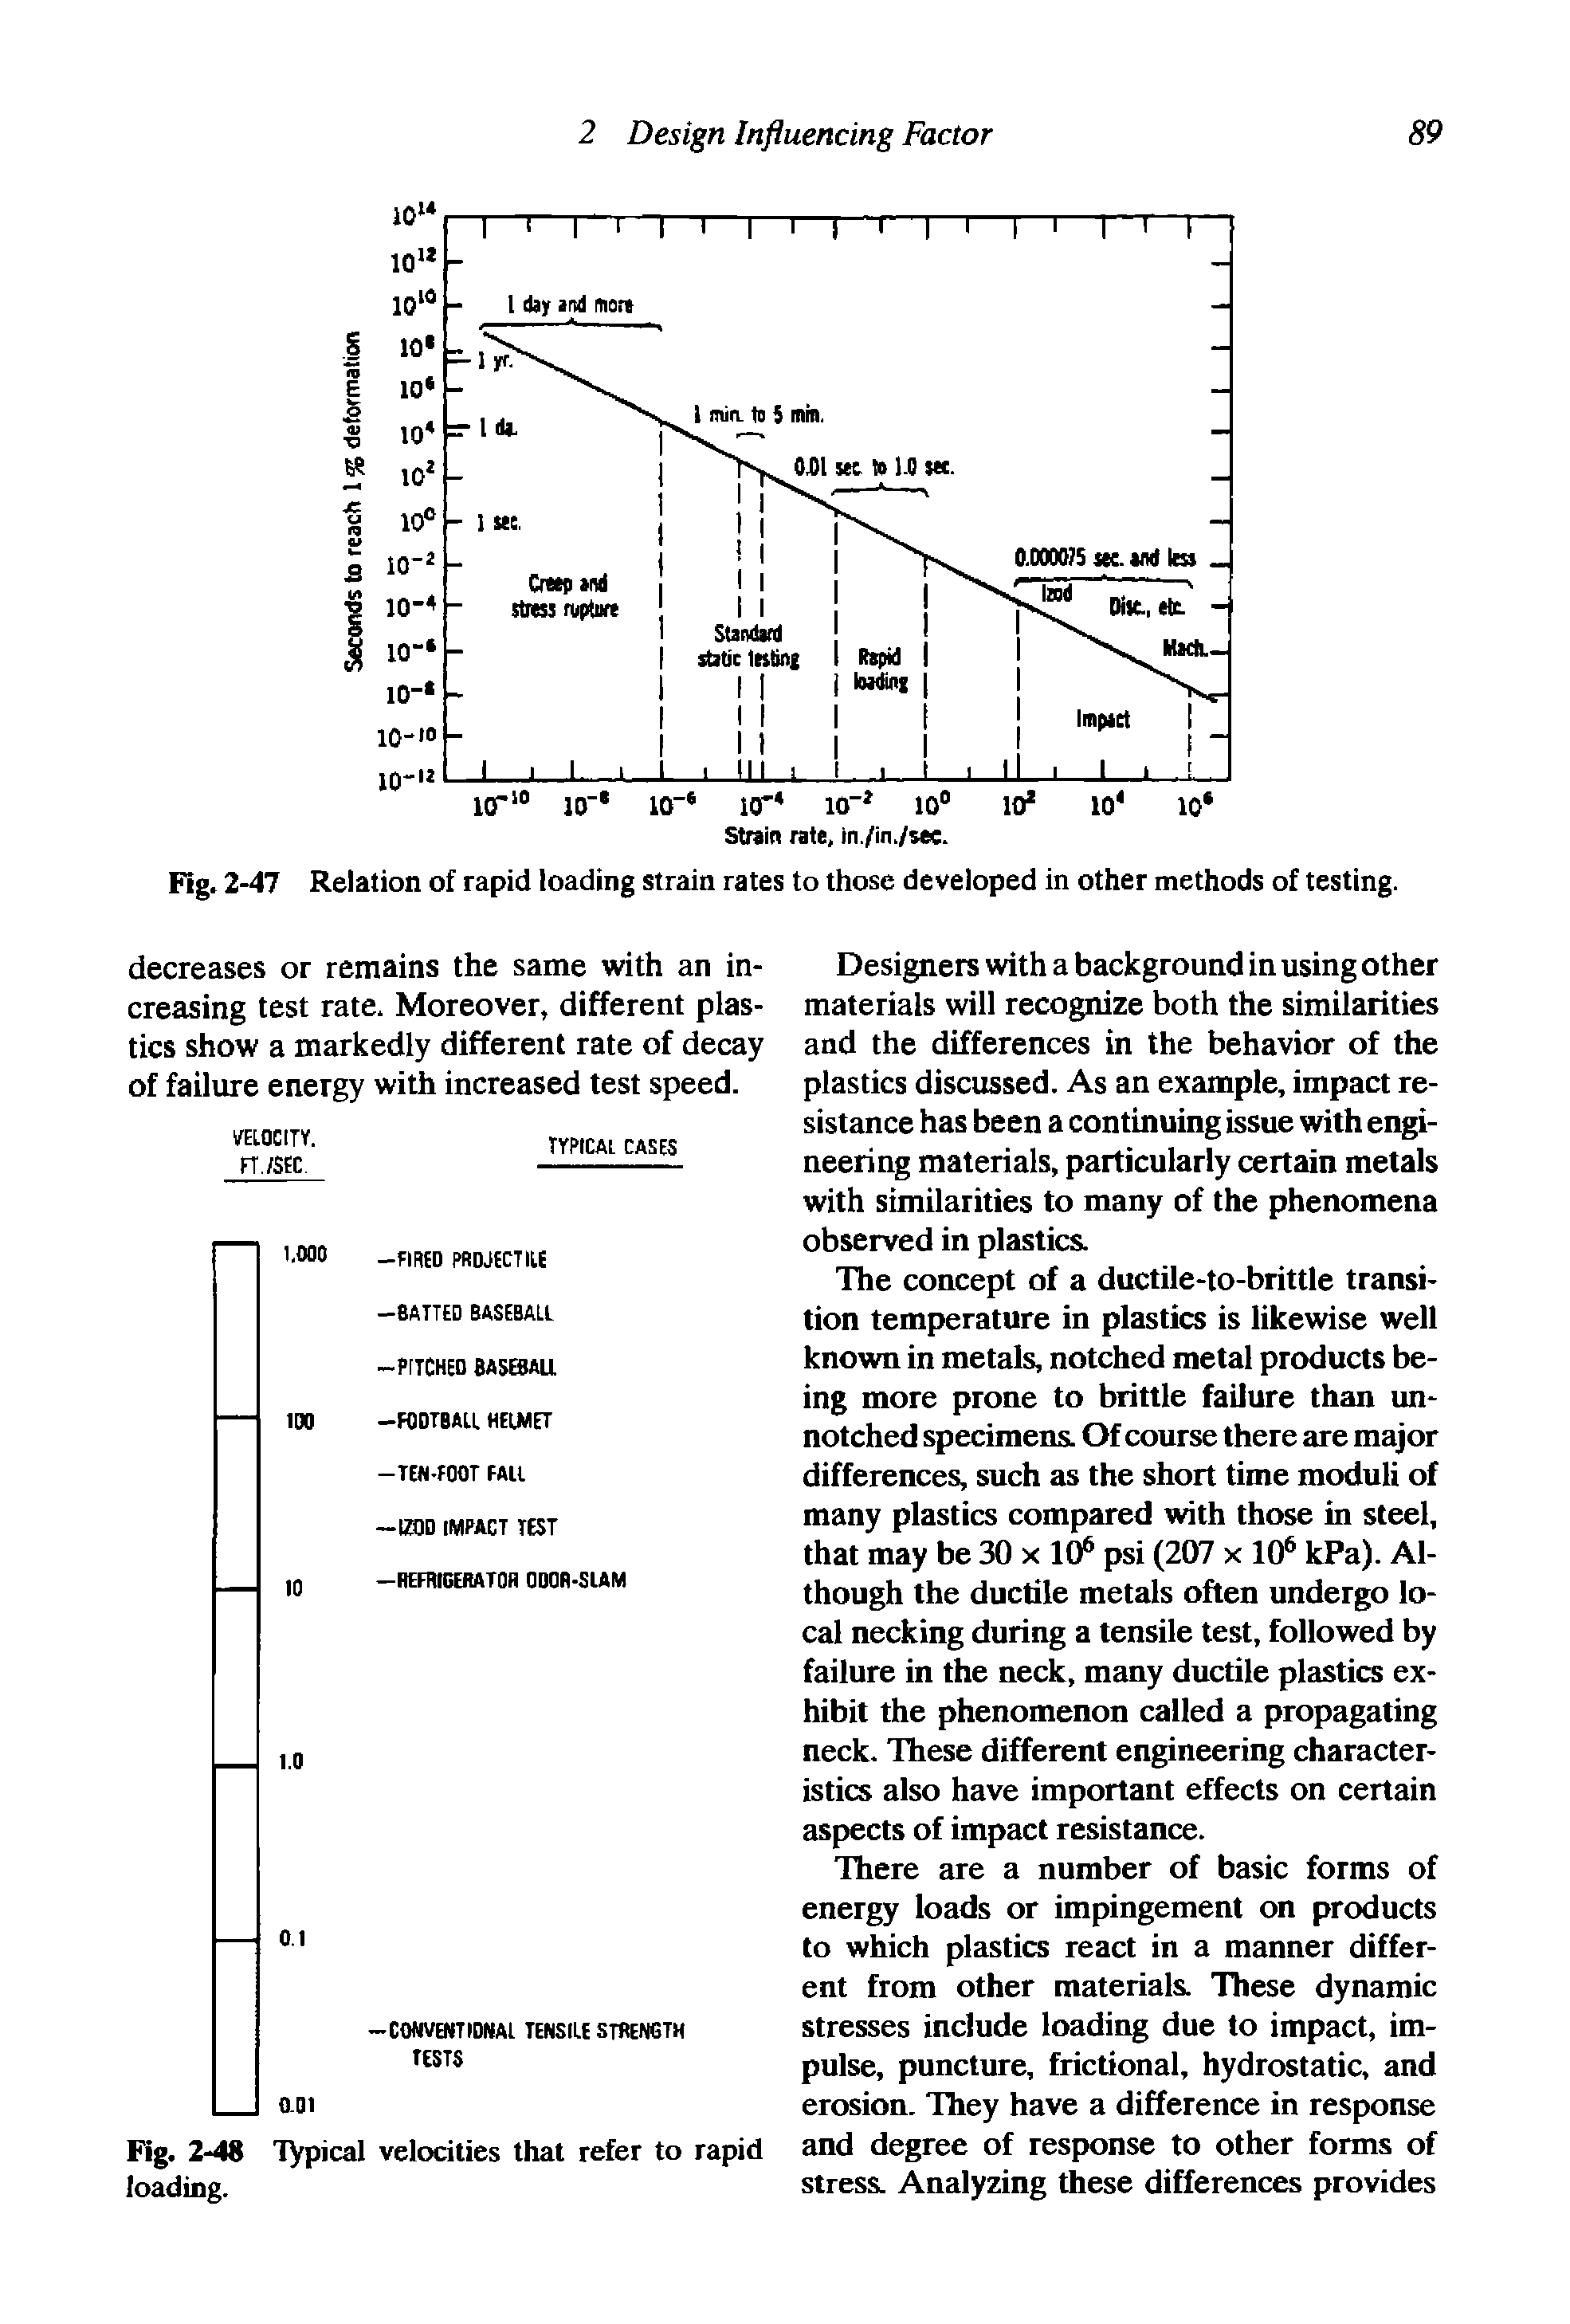 Fig. 2-47 Relation of rapid loading strain rates to those developed in other methods of testing.